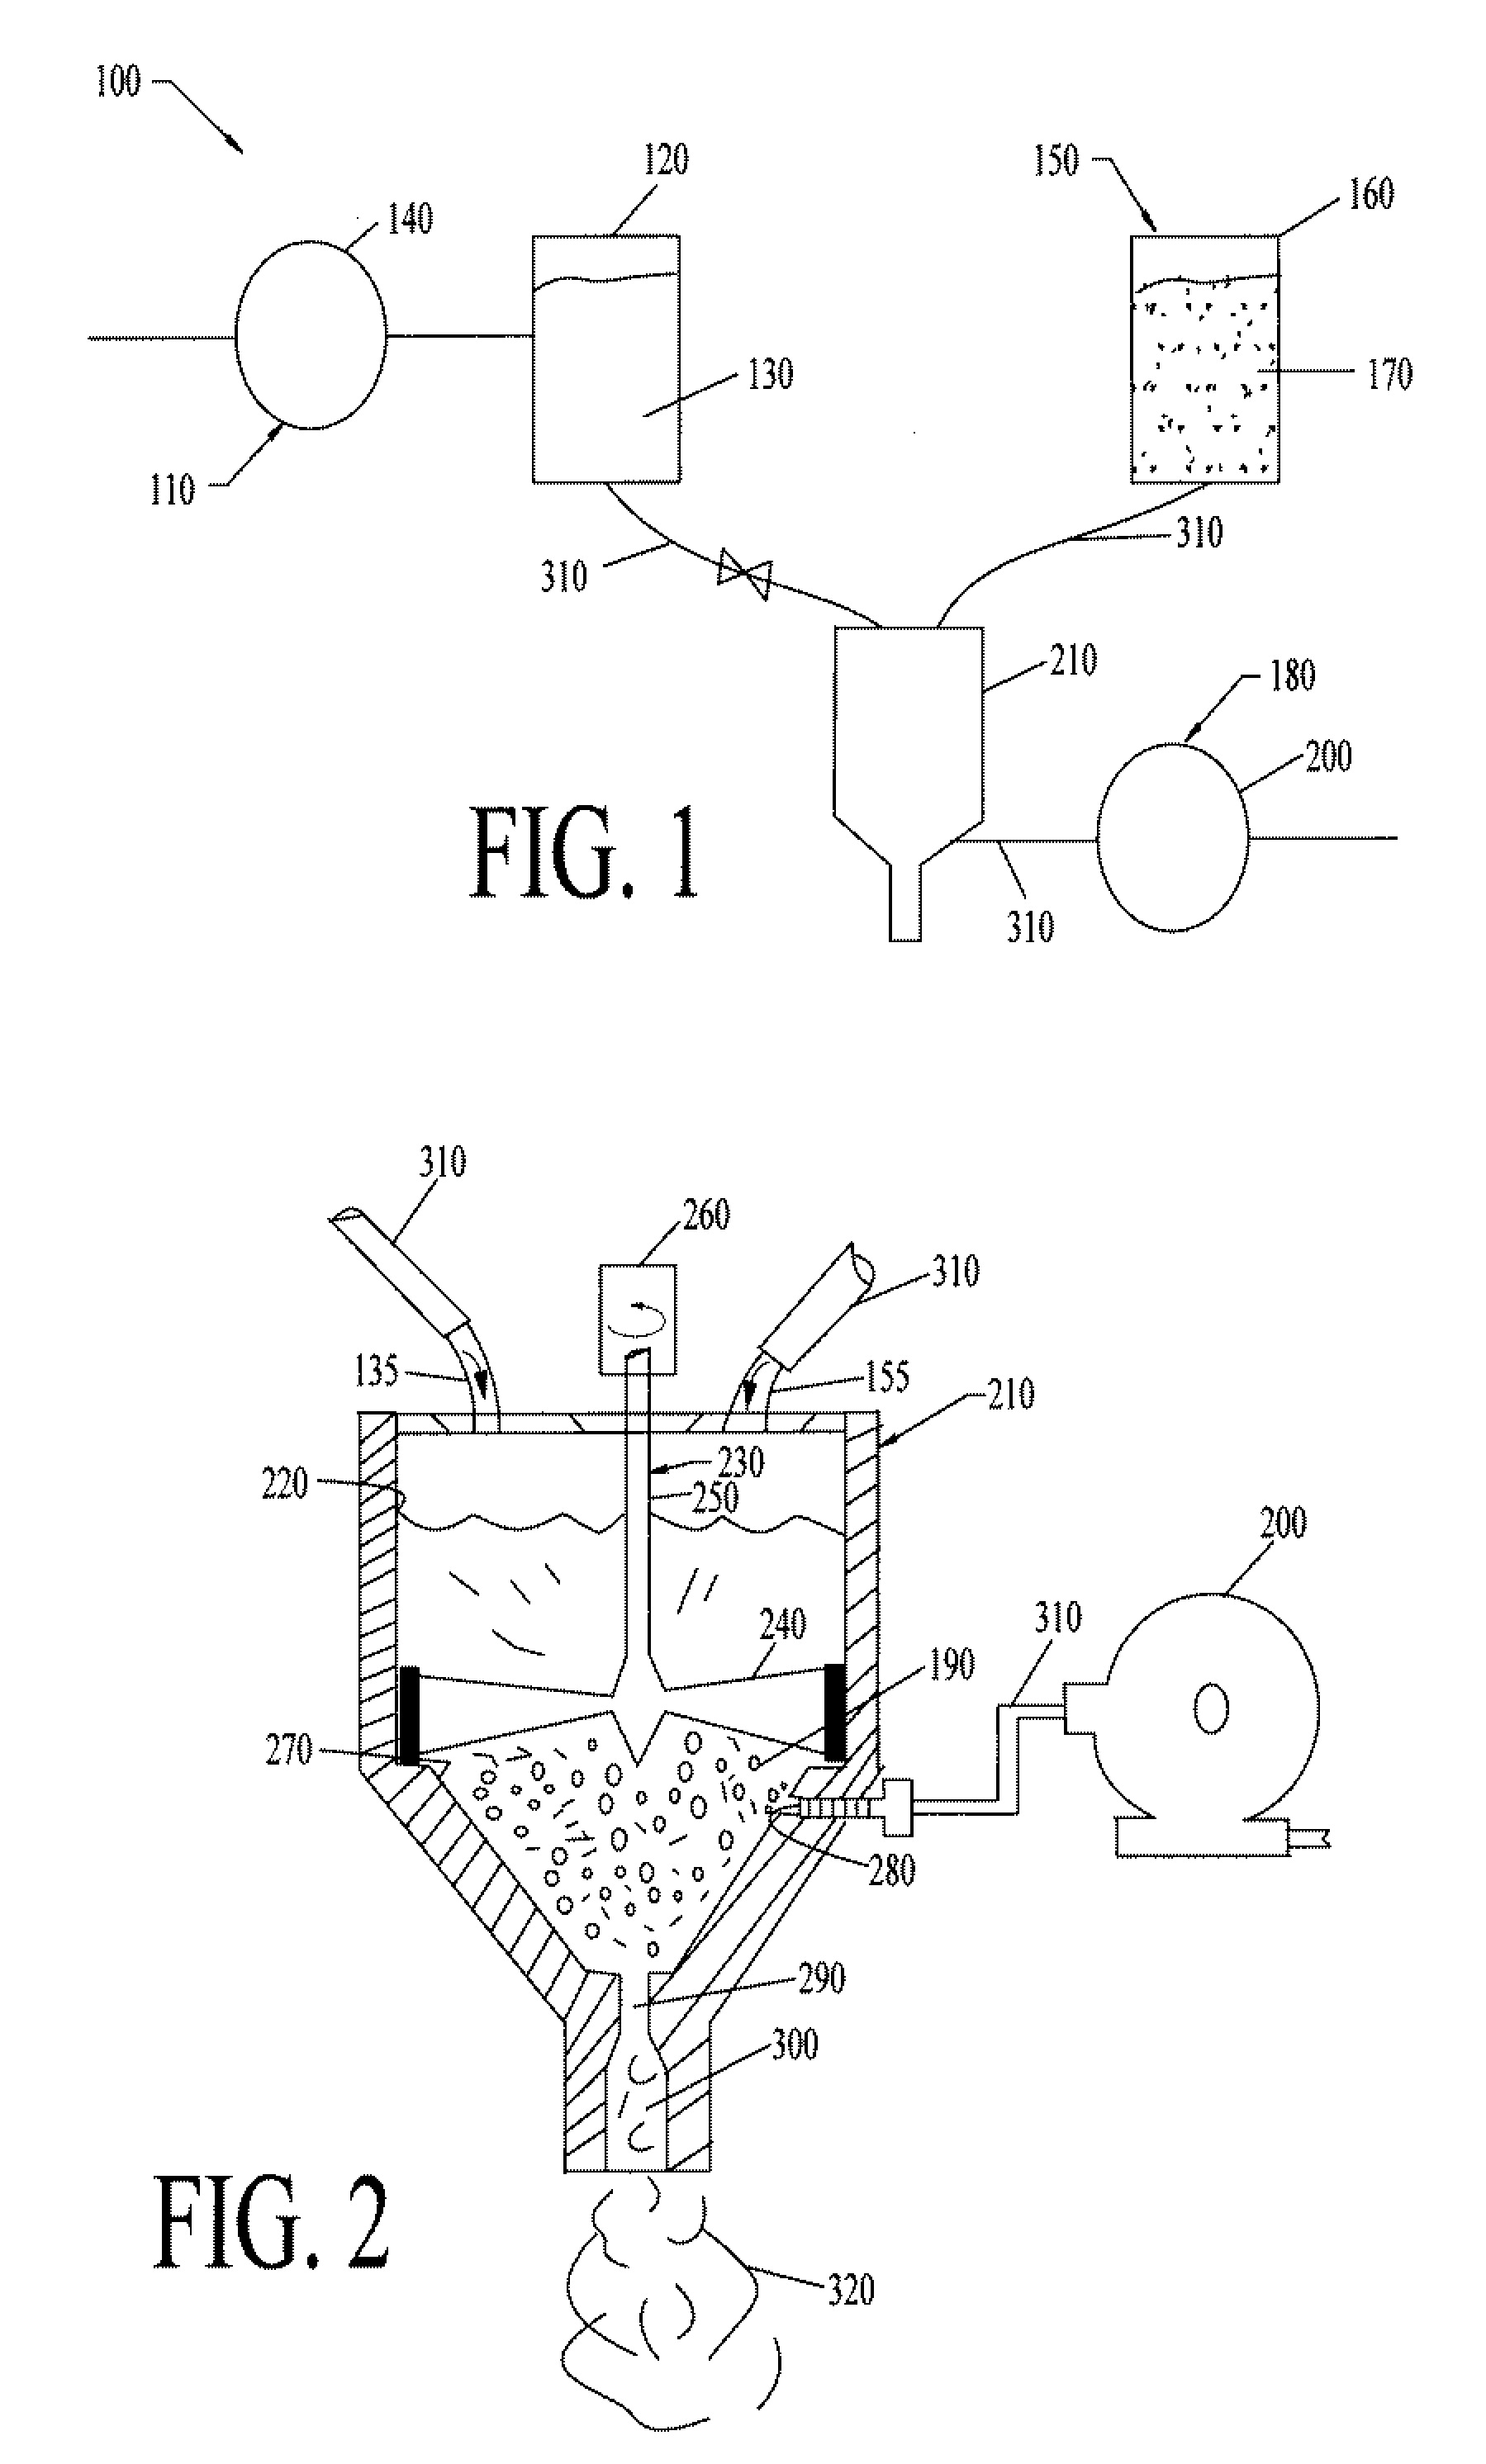 System and Method for Producing Foamed Milk from Powder